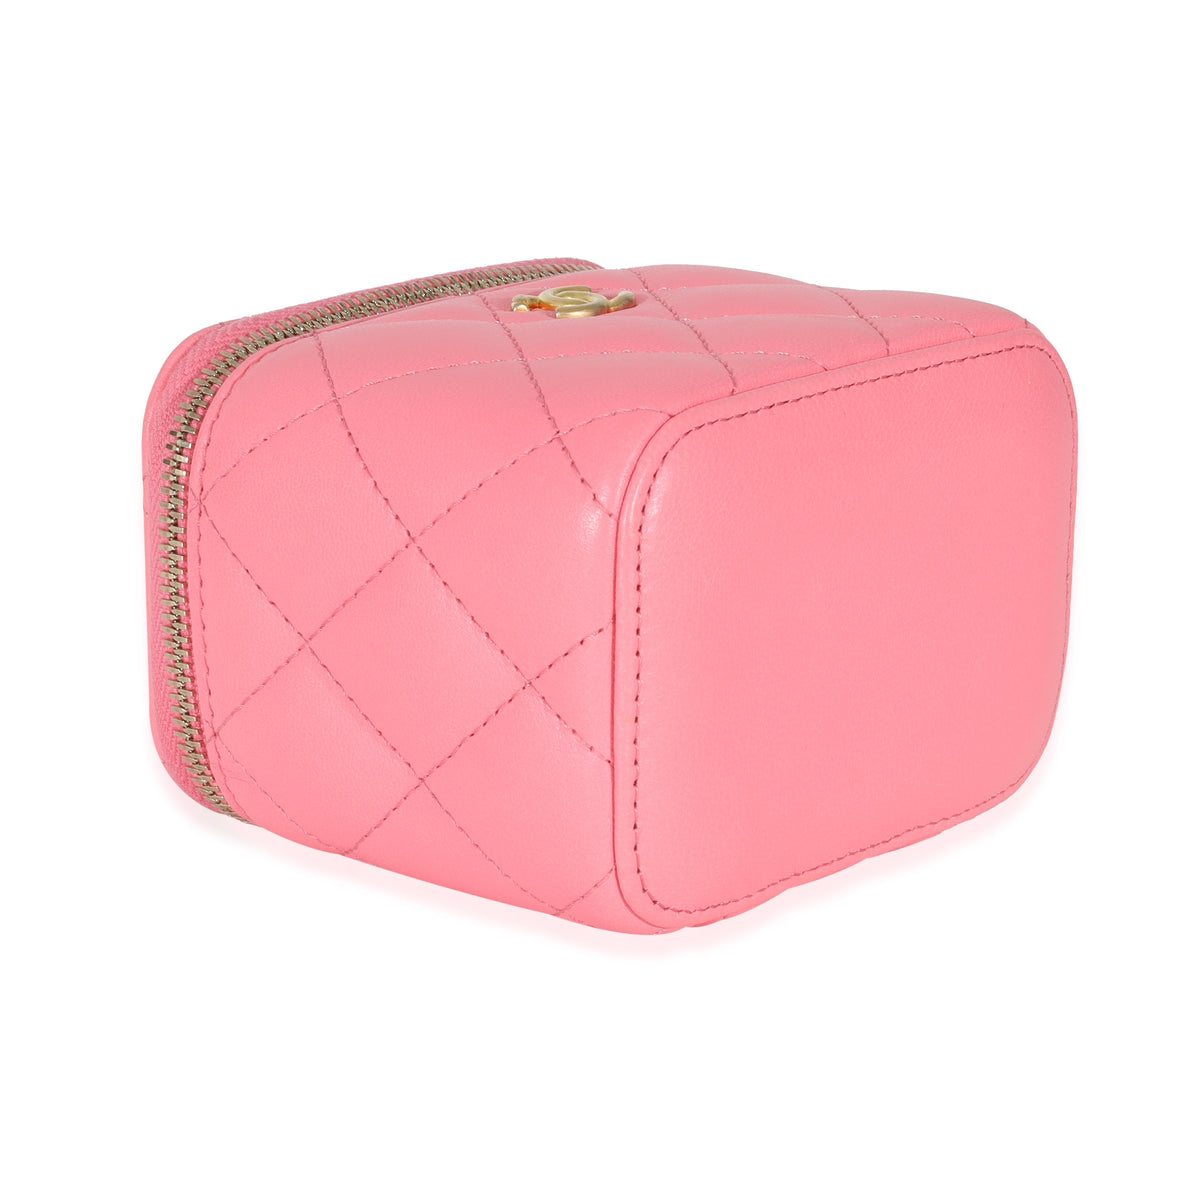 Chanel Vintage Baby Pink Cosmetic Case – Amarcord Vintage Fashion